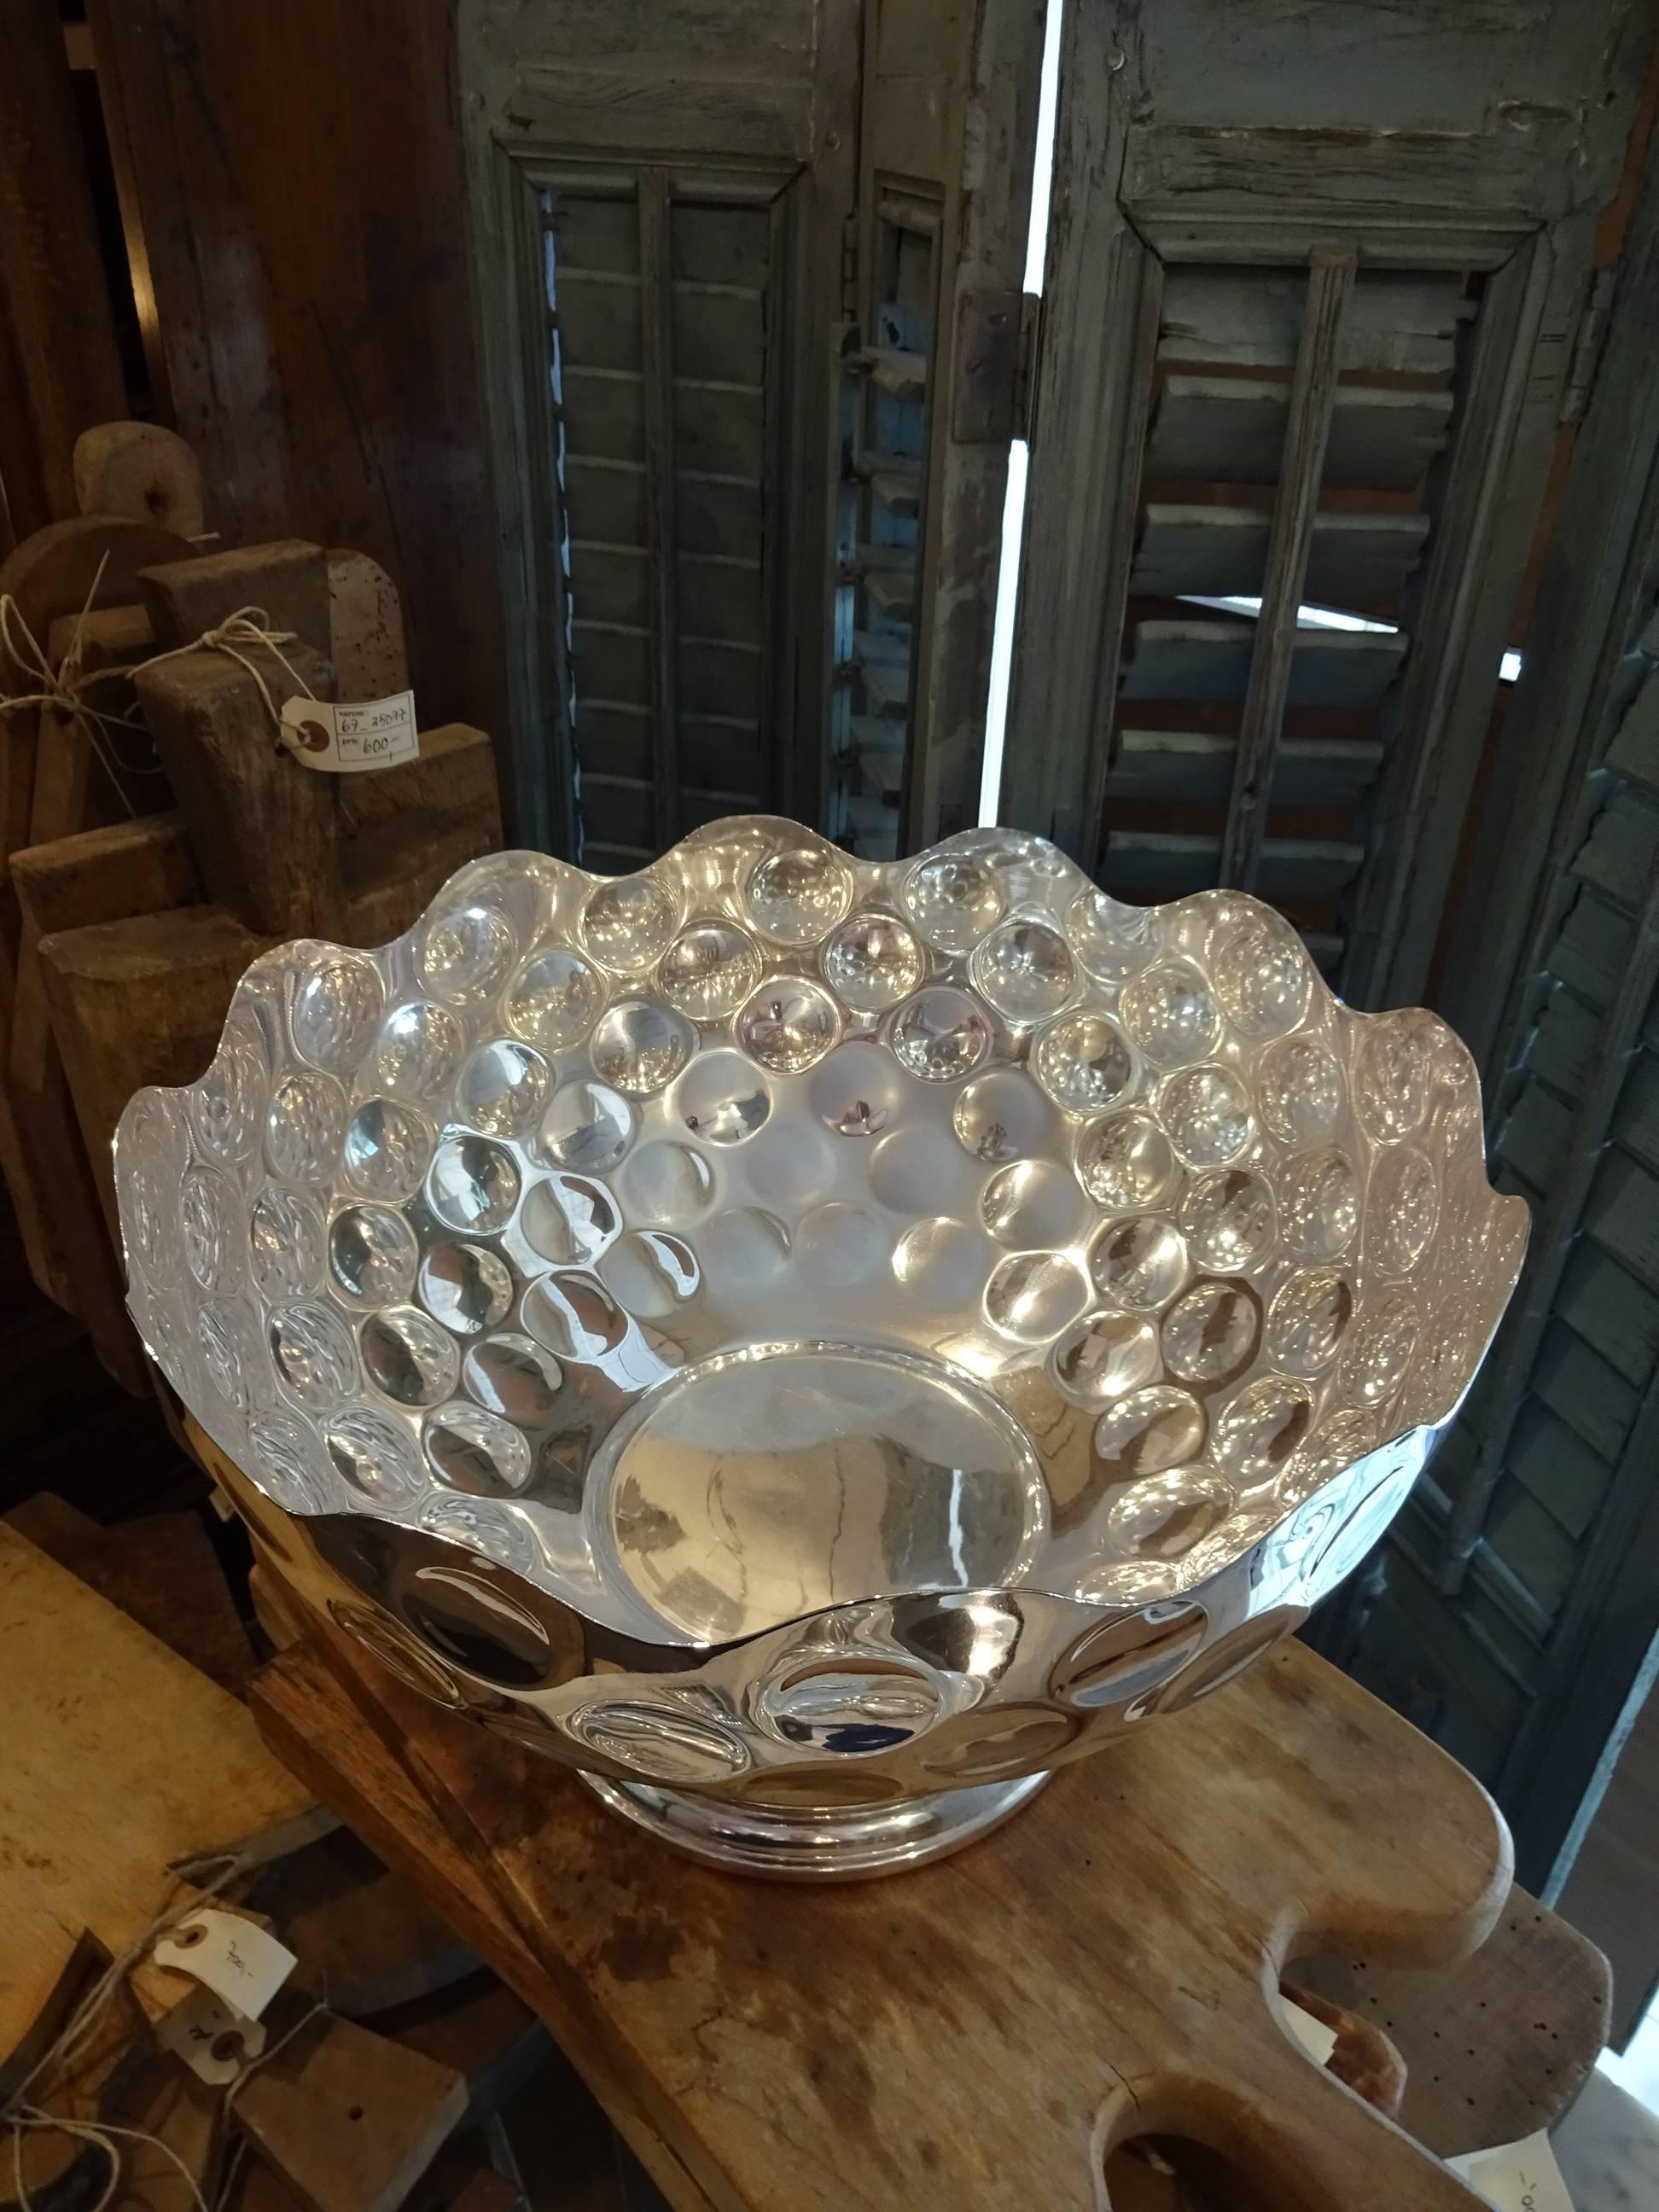 Very elegant silver plated champagne cooler, from France. Designed to represented half a golf ball, the cooler comes from an old and distinguished golf club in the South of France. Could quite easily accommodate a couple of magnum bottles or